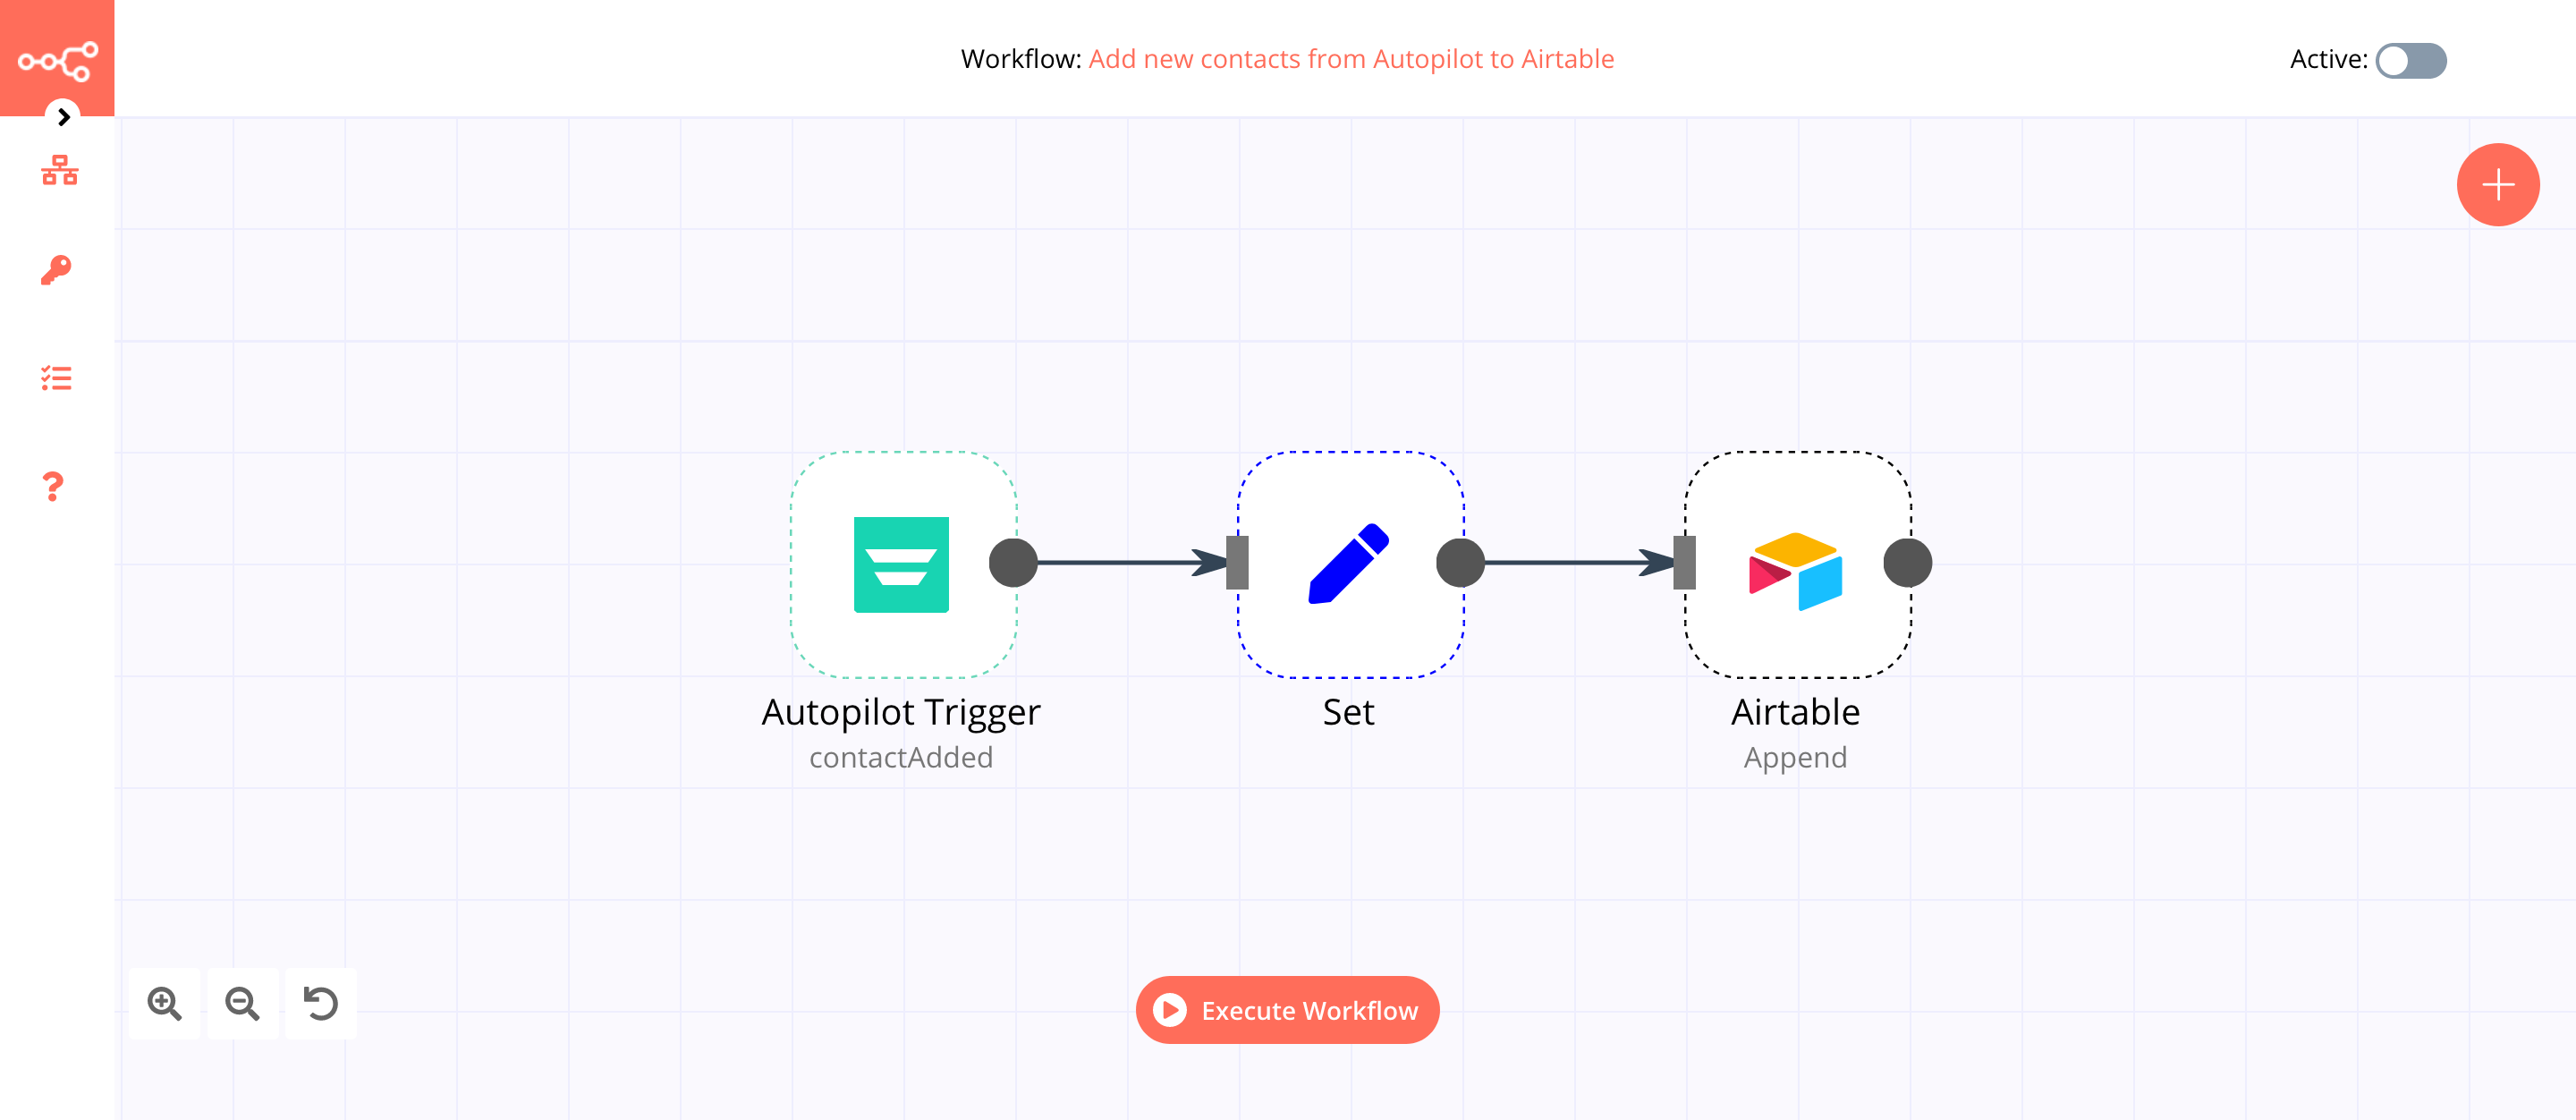 A workflow with the Autopilot Trigger node